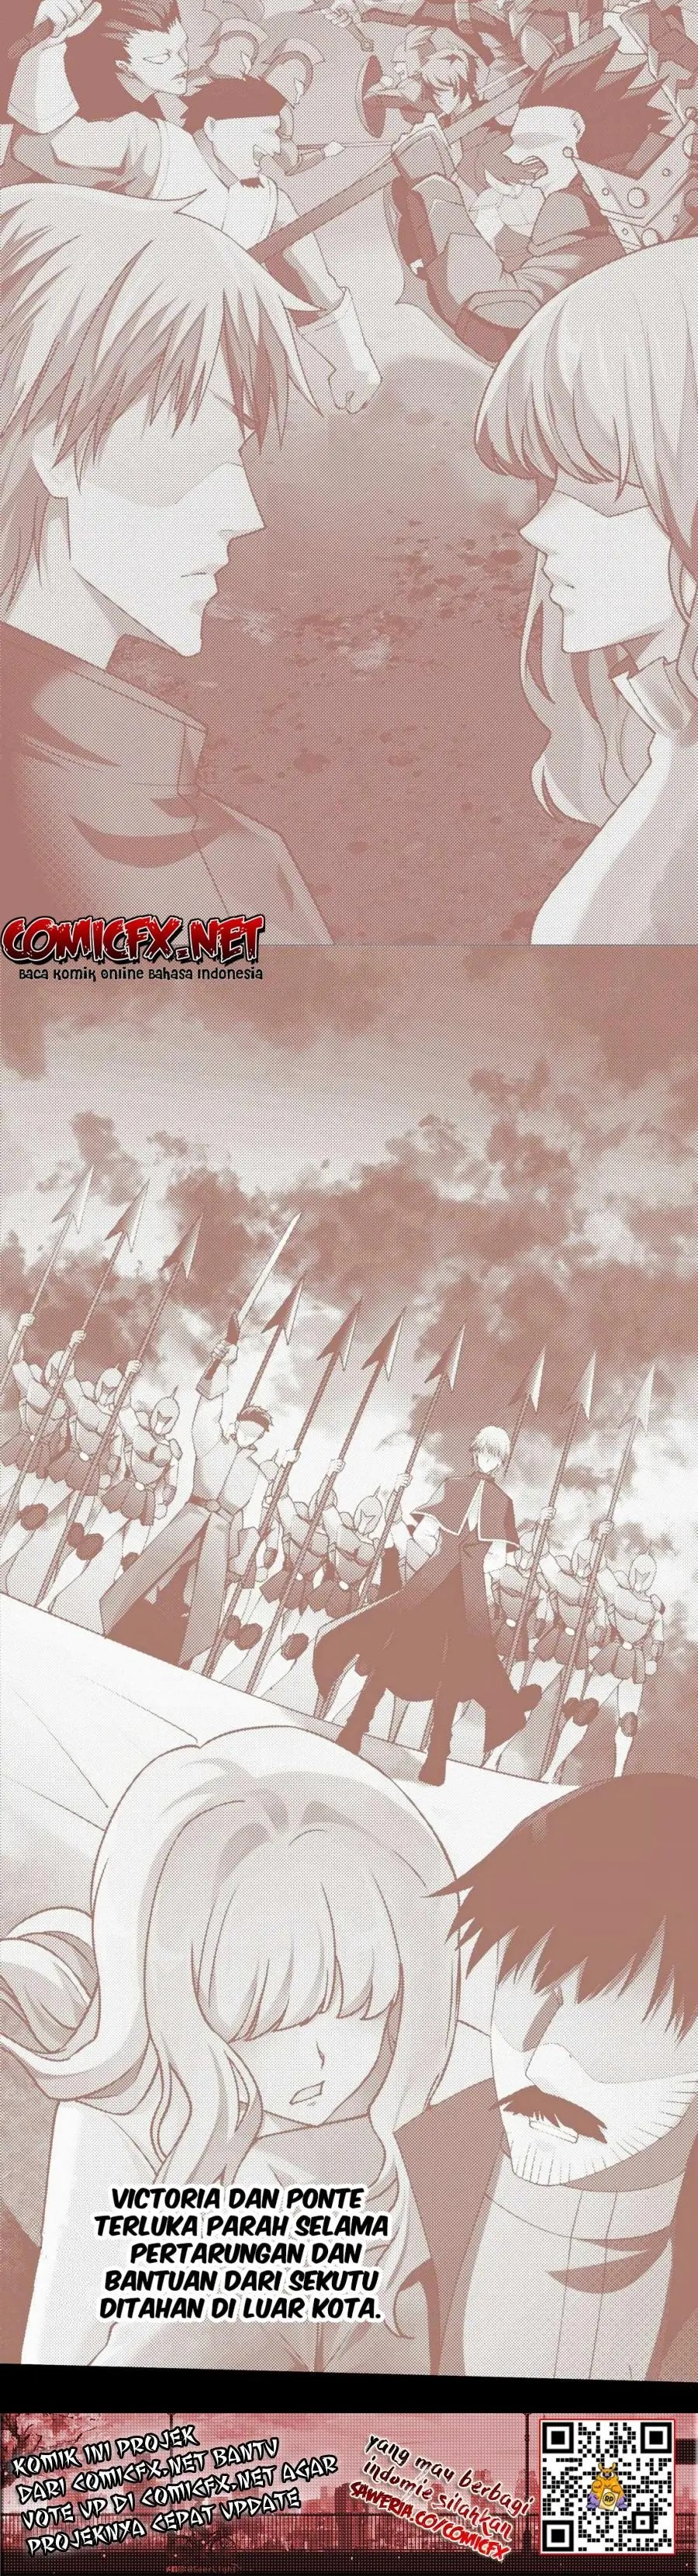 Dilarang COPAS - situs resmi www.mangacanblog.com - Komik little tyrant doesnt want to meet with a bad end 010 - chapter 10 11 Indonesia little tyrant doesnt want to meet with a bad end 010 - chapter 10 Terbaru 22|Baca Manga Komik Indonesia|Mangacan